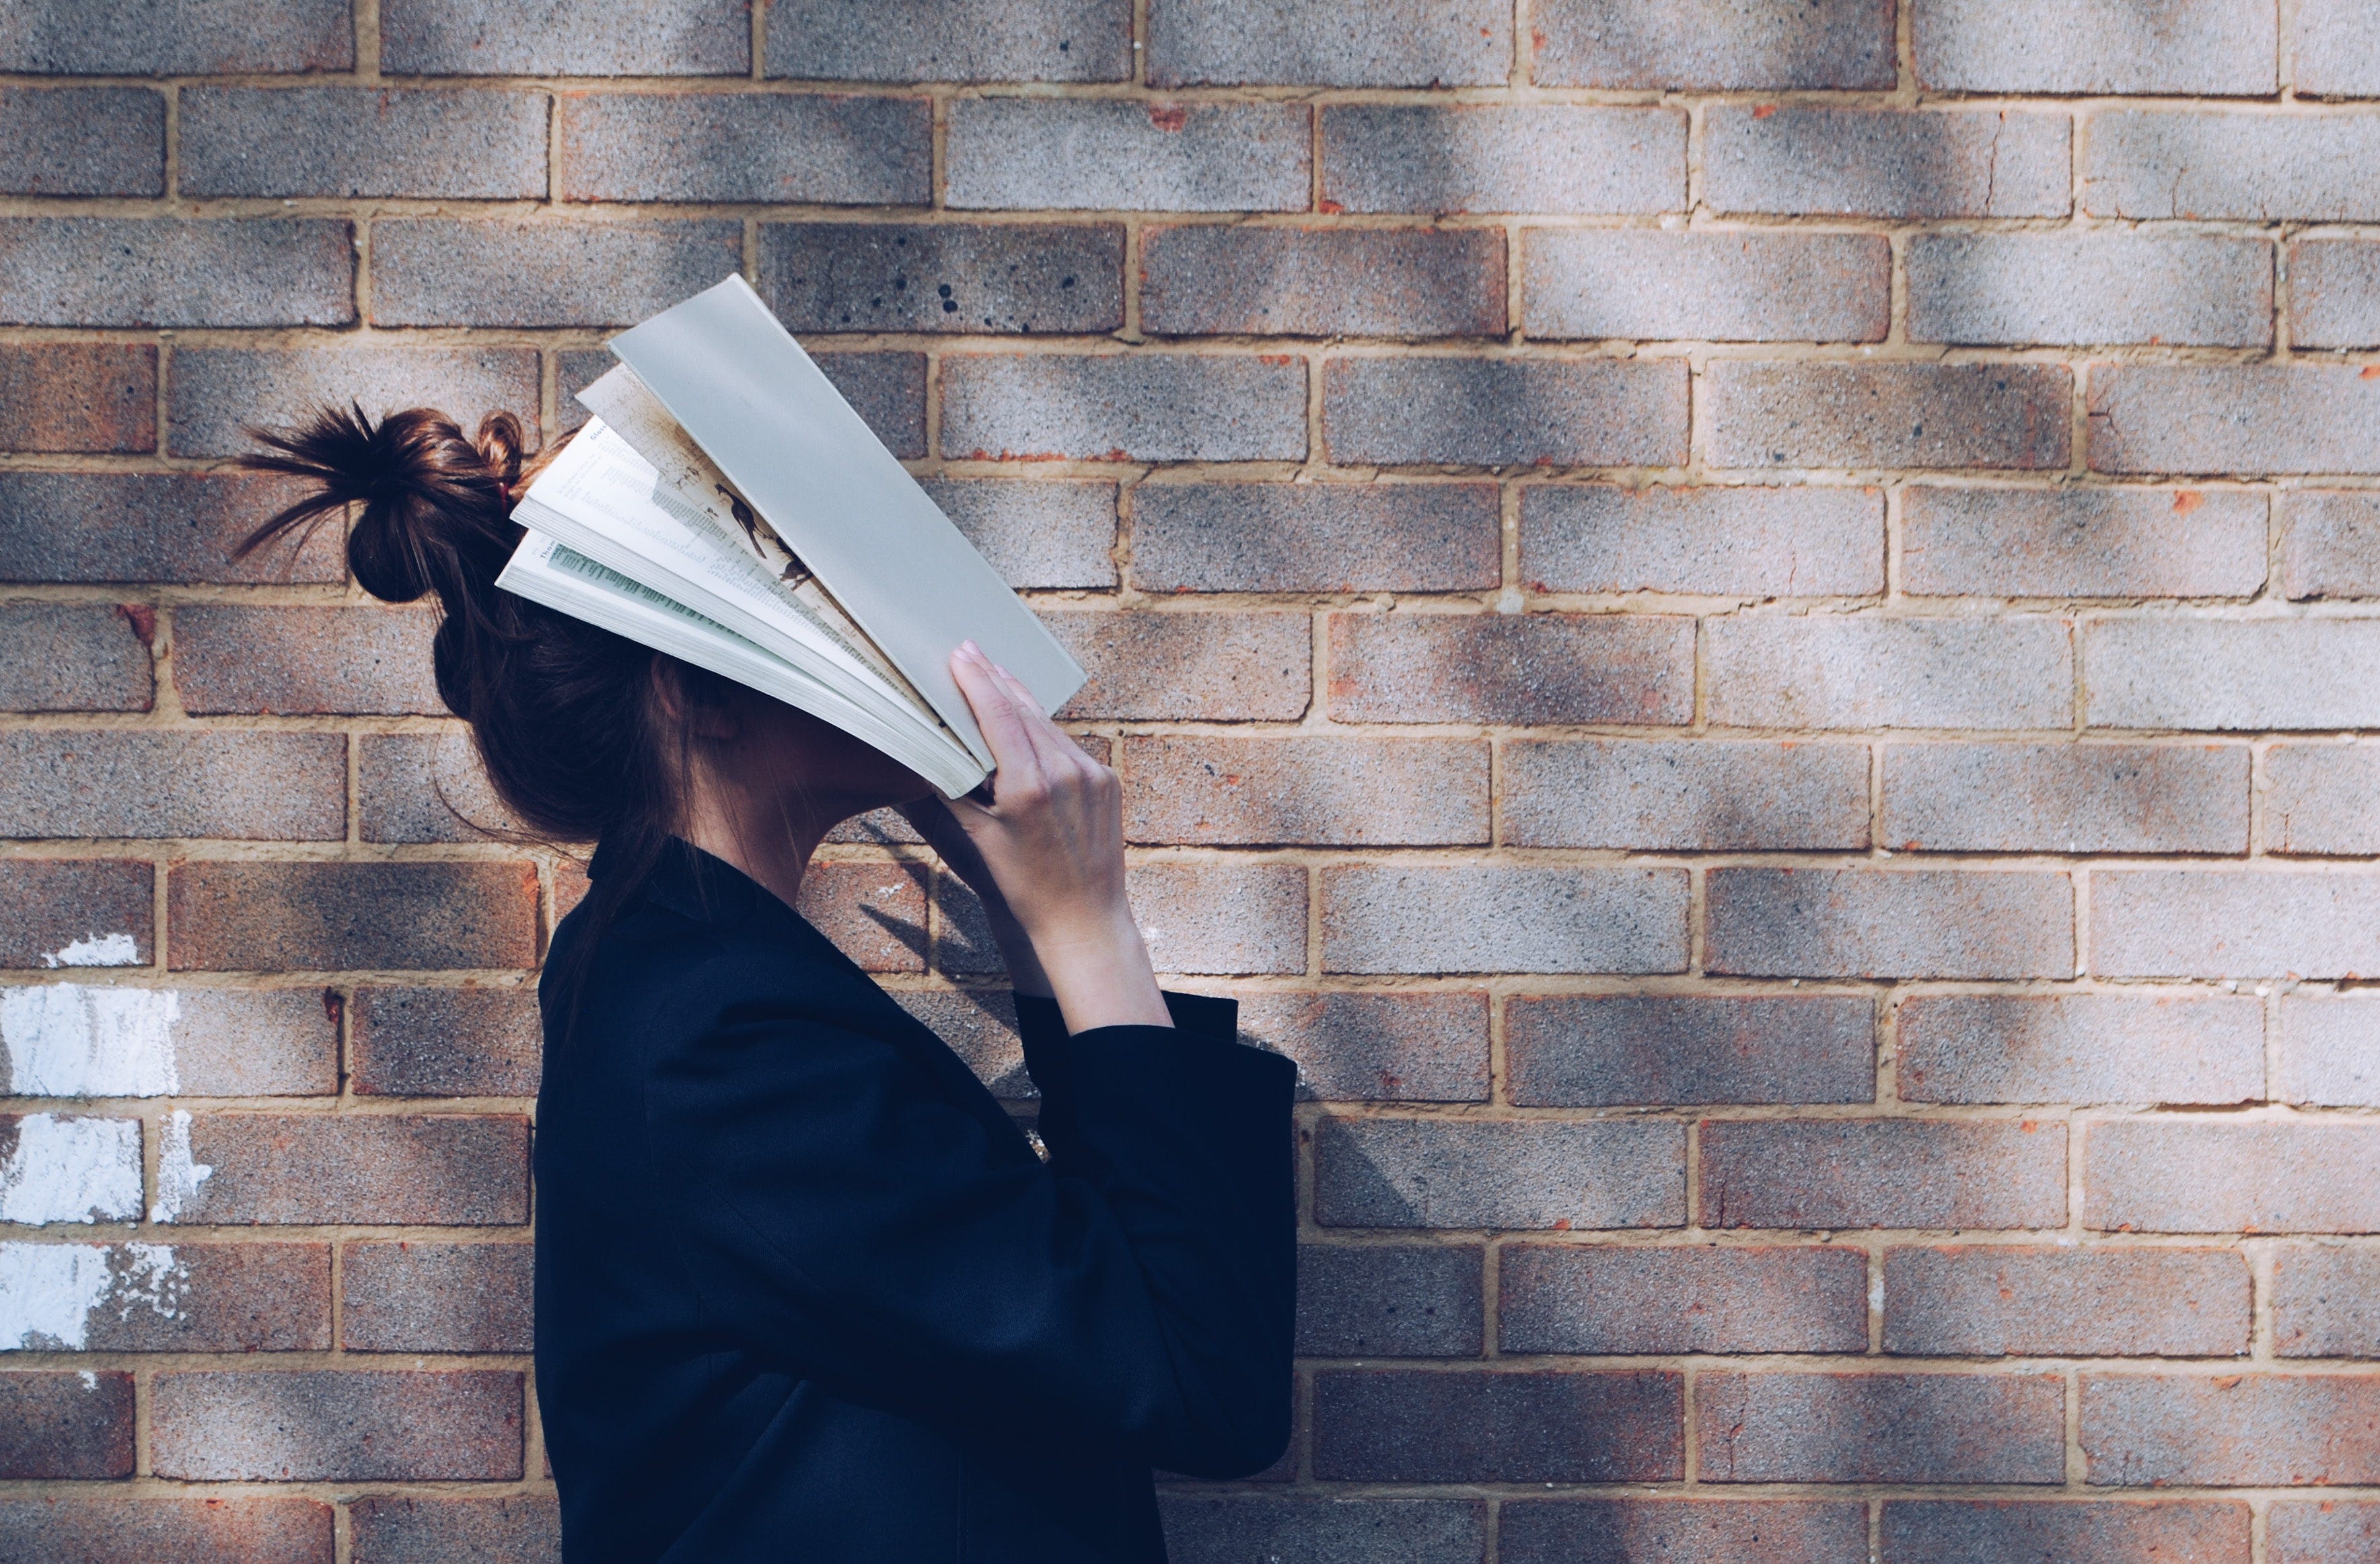 A woman stands before a brick wall. Her hair is in a bun and she is holding a book across her face.